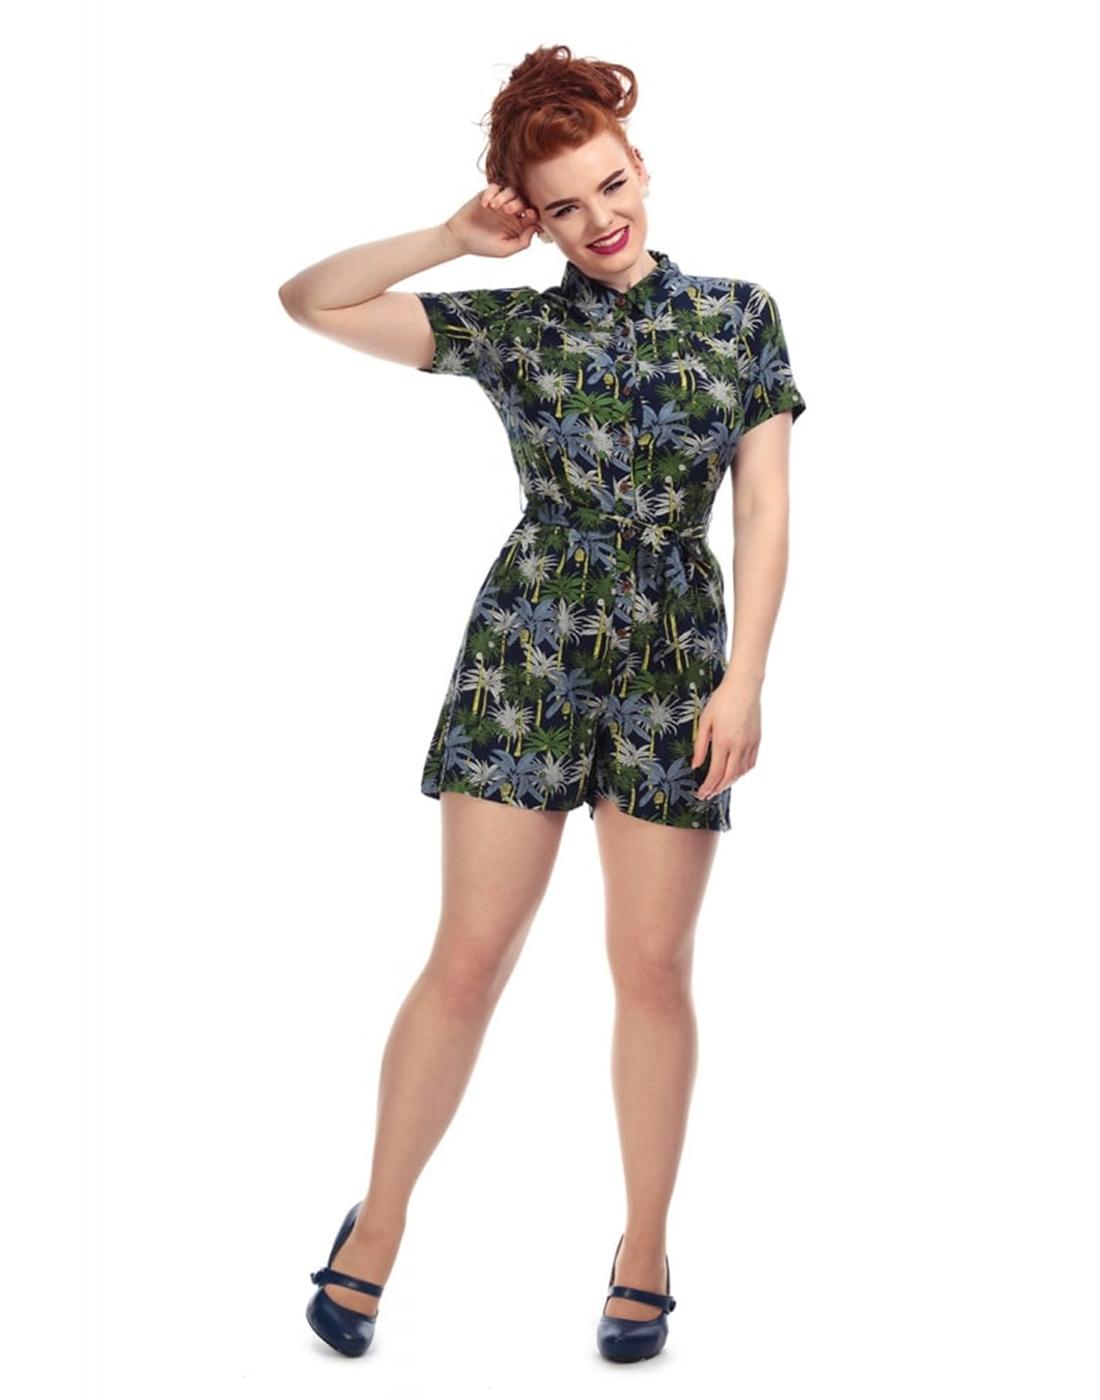 Collectif Clothing Womens Vintage Inspired Frou Palm Tree Print Short Sleeve Playsuit Romper 